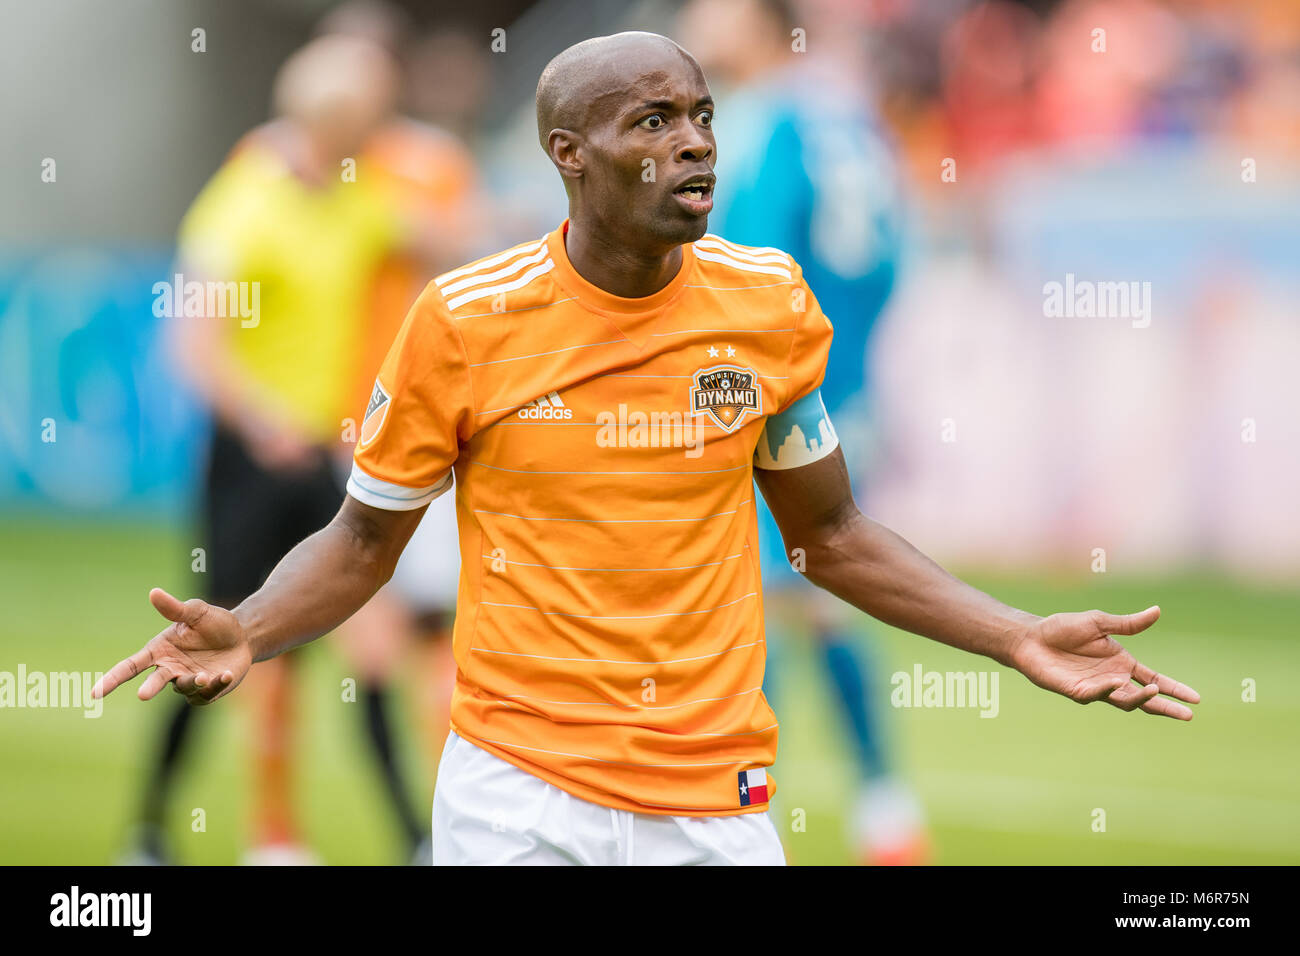 Houston, TX, USA. 3rd Mar, 2018. Houston Dynamo defender DaMarcus Beasley (7) shrugs while questioning a non-call by the referee during an MLS soccer match between the Houston Dynamo and Atlanta United FC at BBVA Compass Stadium in Houston, TX. The Dynamo won 4-0.Trask Smith/CSM/Alamy Live News Stock Photo